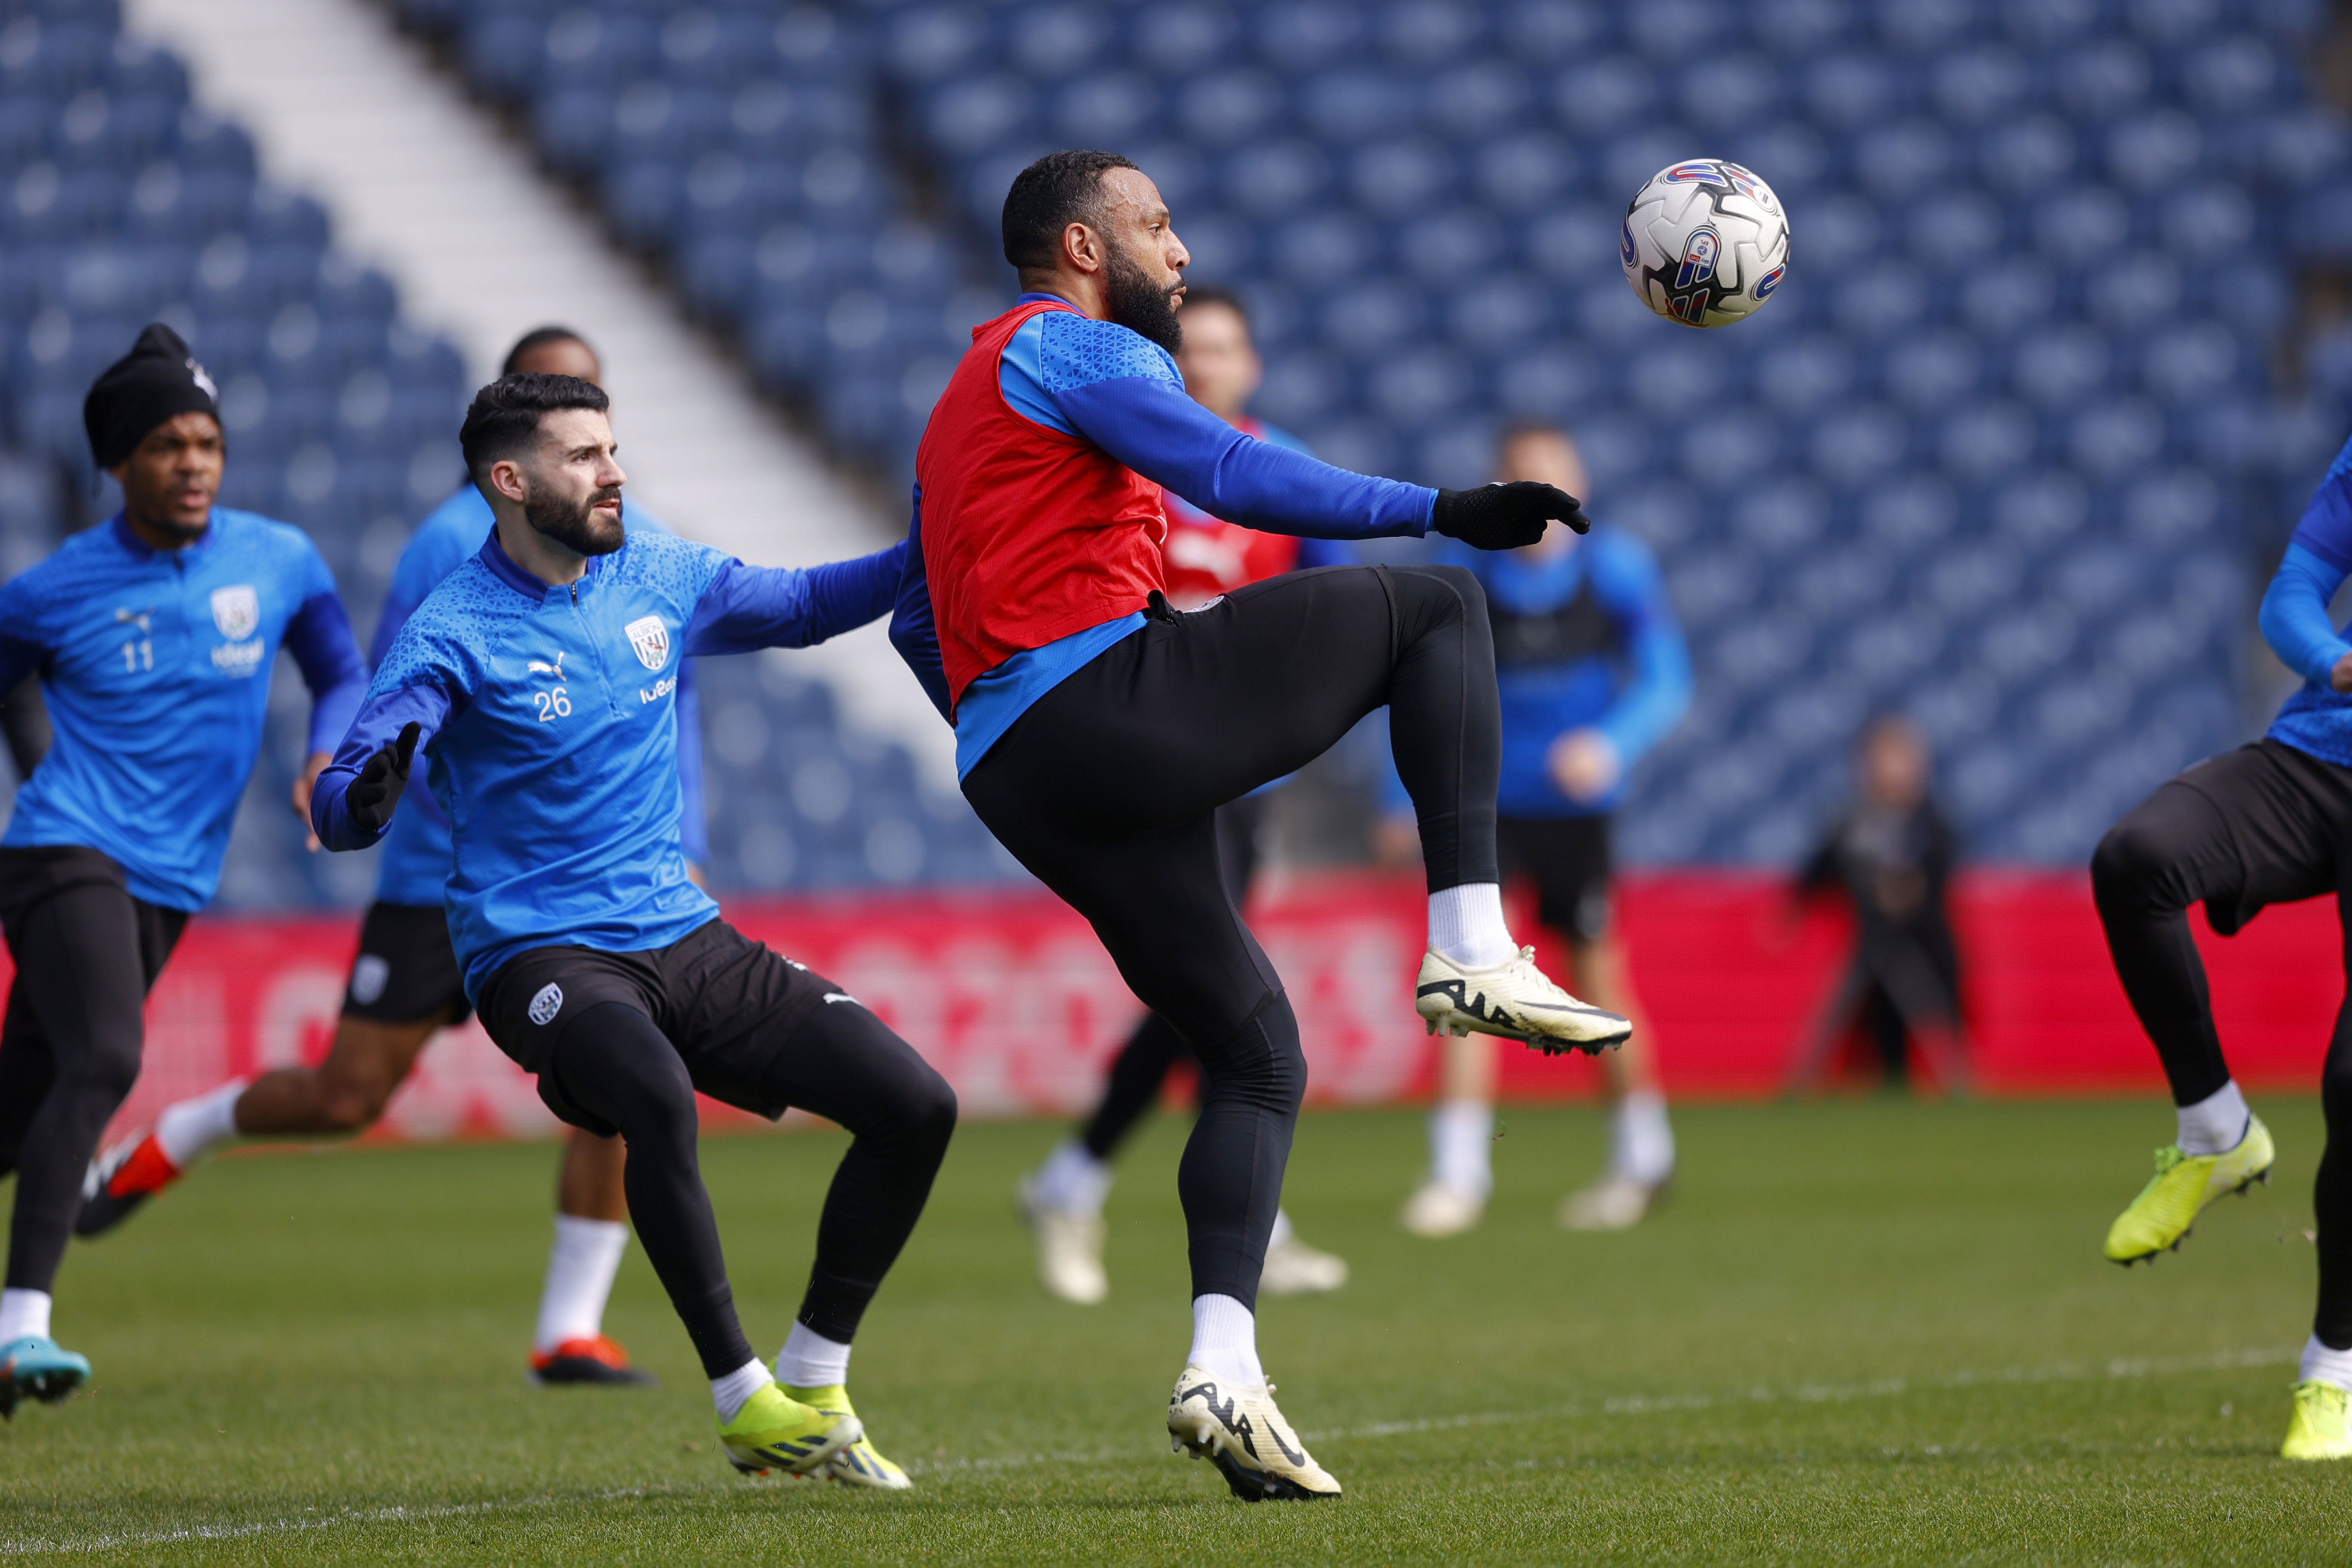 Matty Phillips attempts to control a ball during a training session at The Hawthorns 